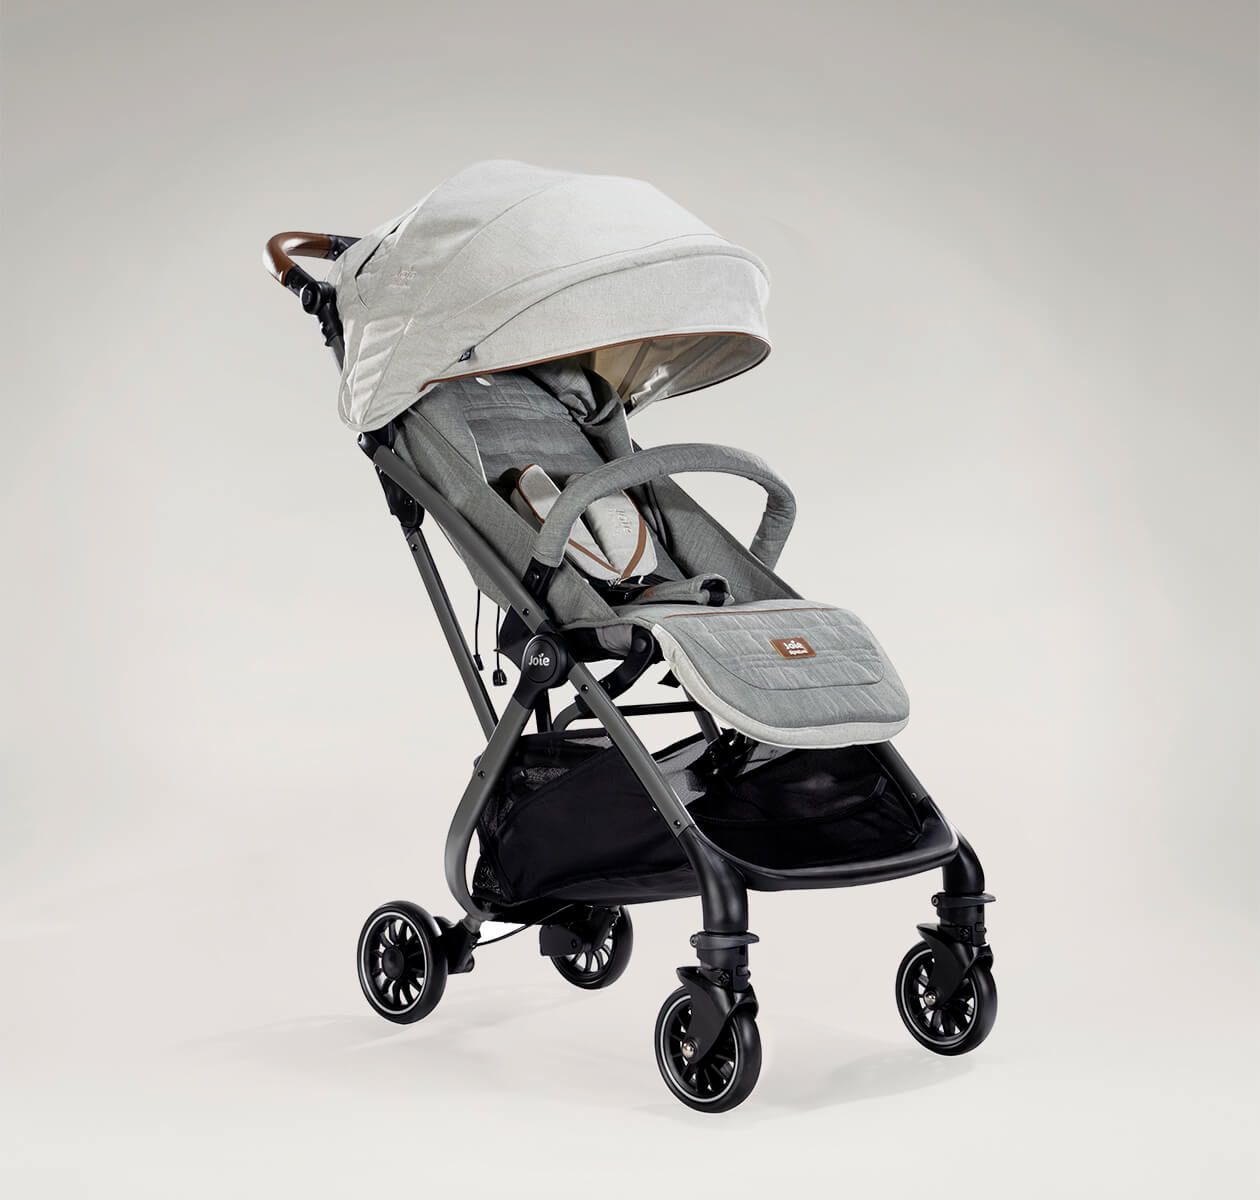 Joie tourist stroller in light gray at an angle.